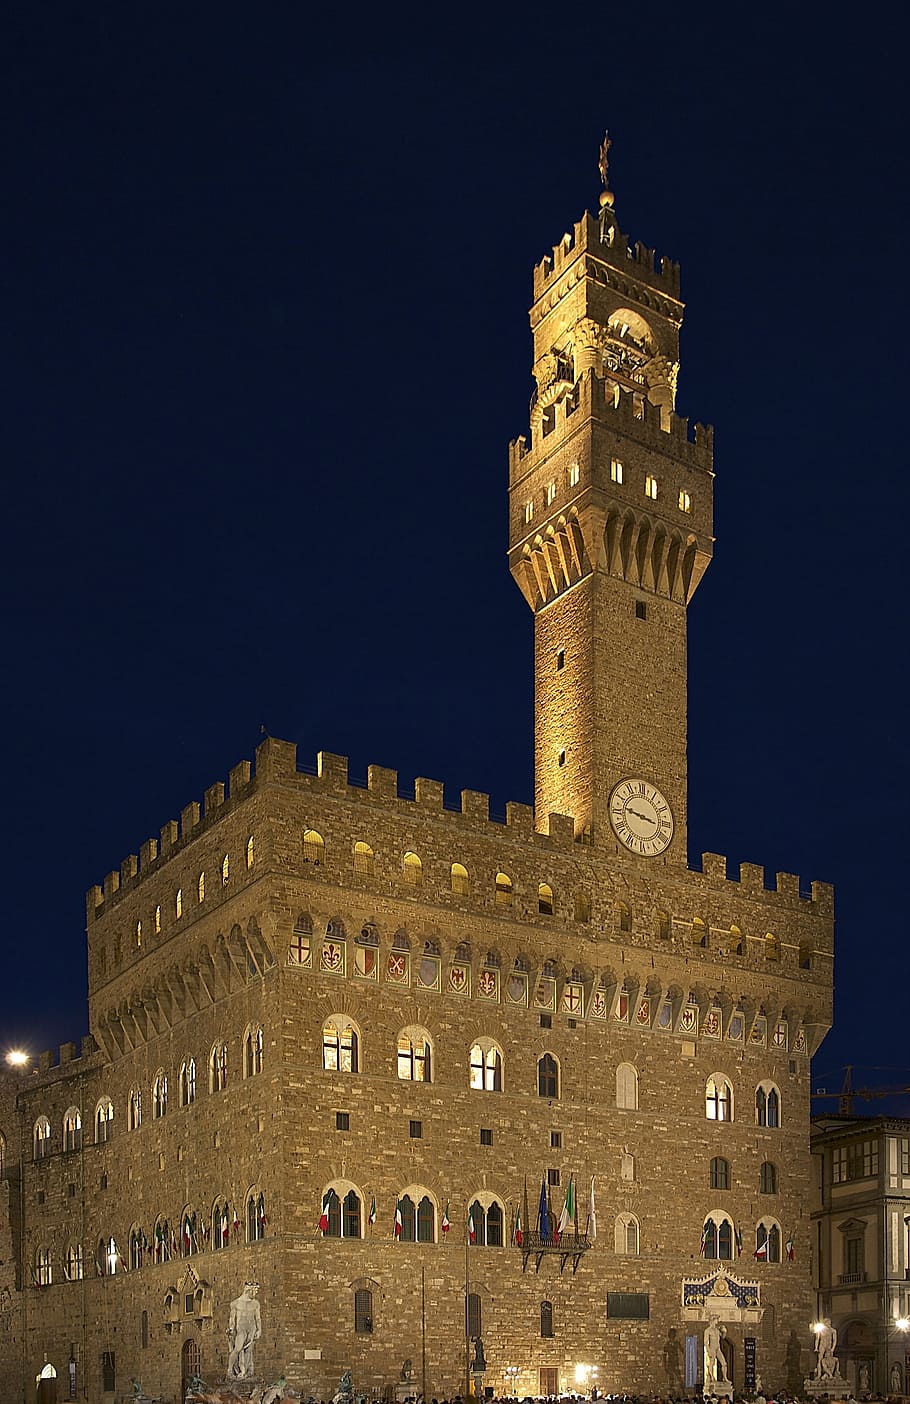 Castle, Palazzo, Palace, Night, Evening, lights, building, tower, spire, architecture